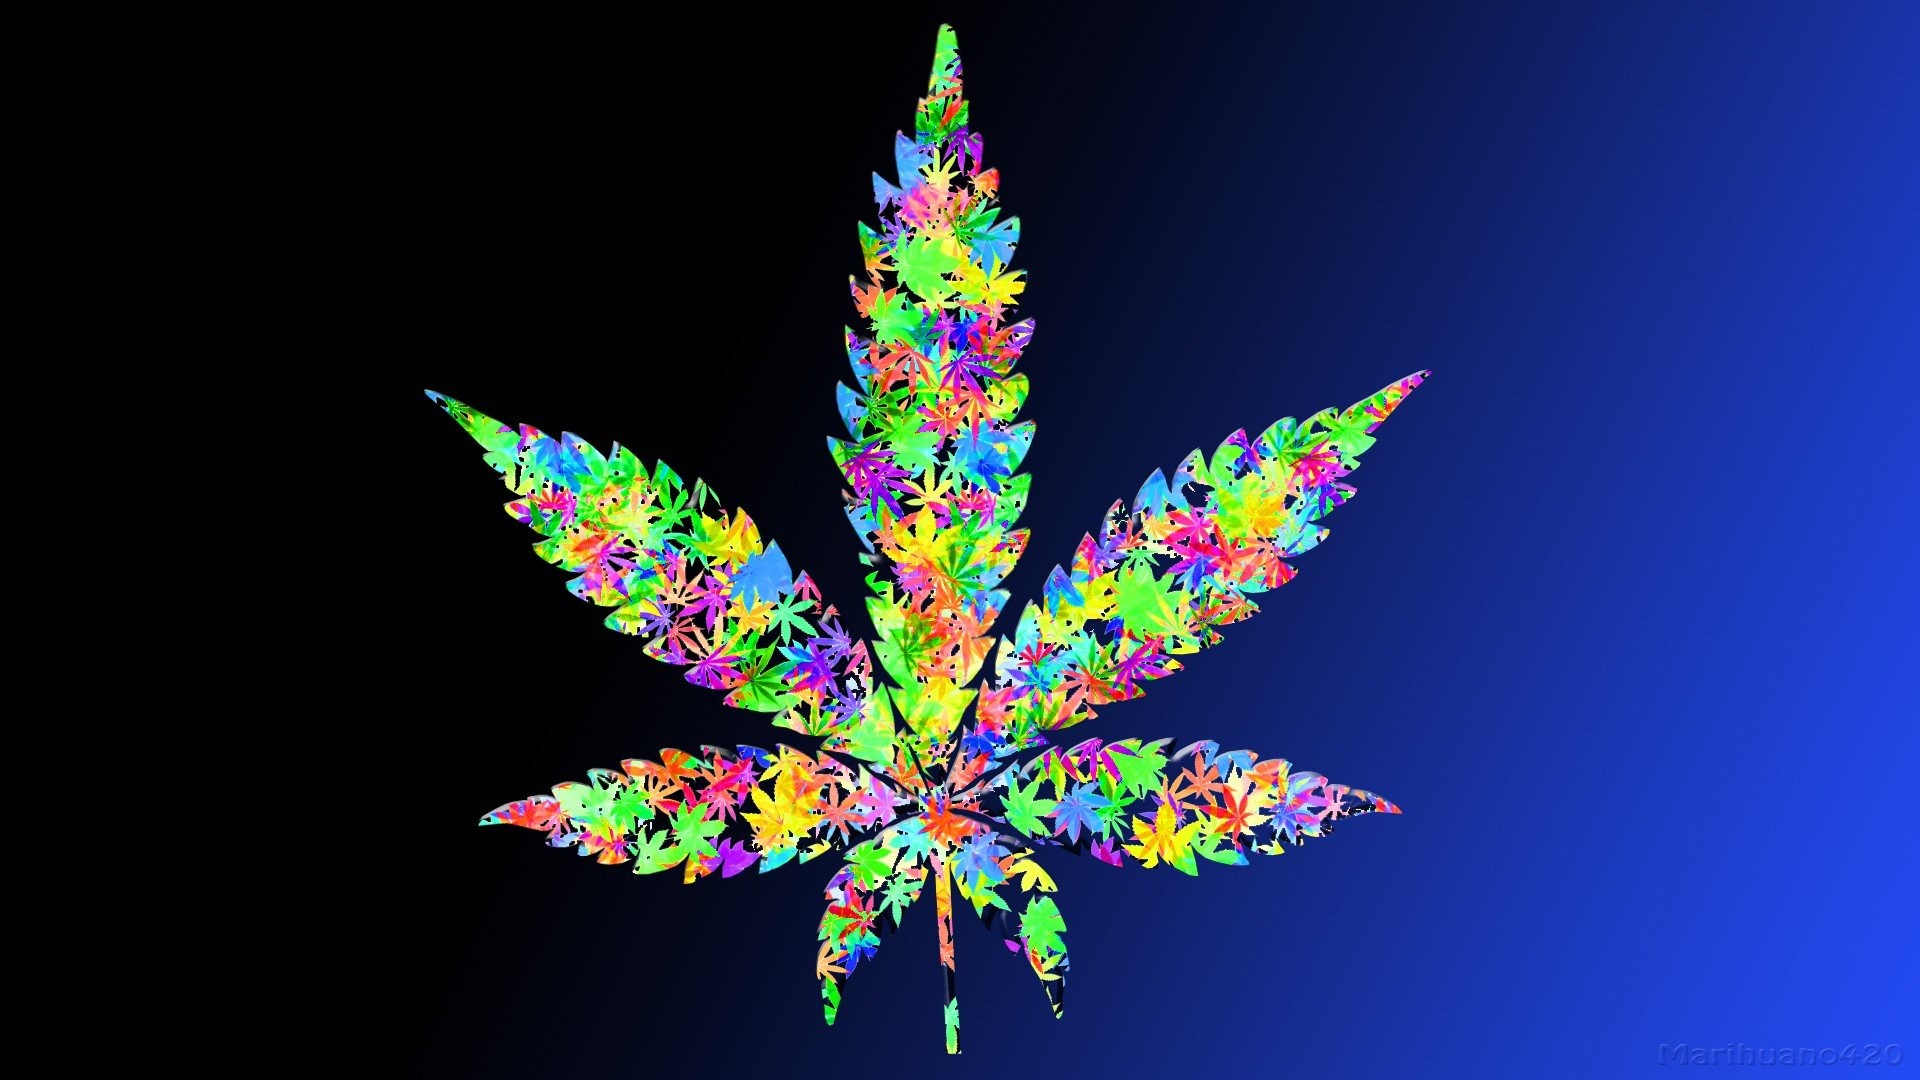 Stoner wallpaper by Lizzy8559  Download on ZEDGE  dff8